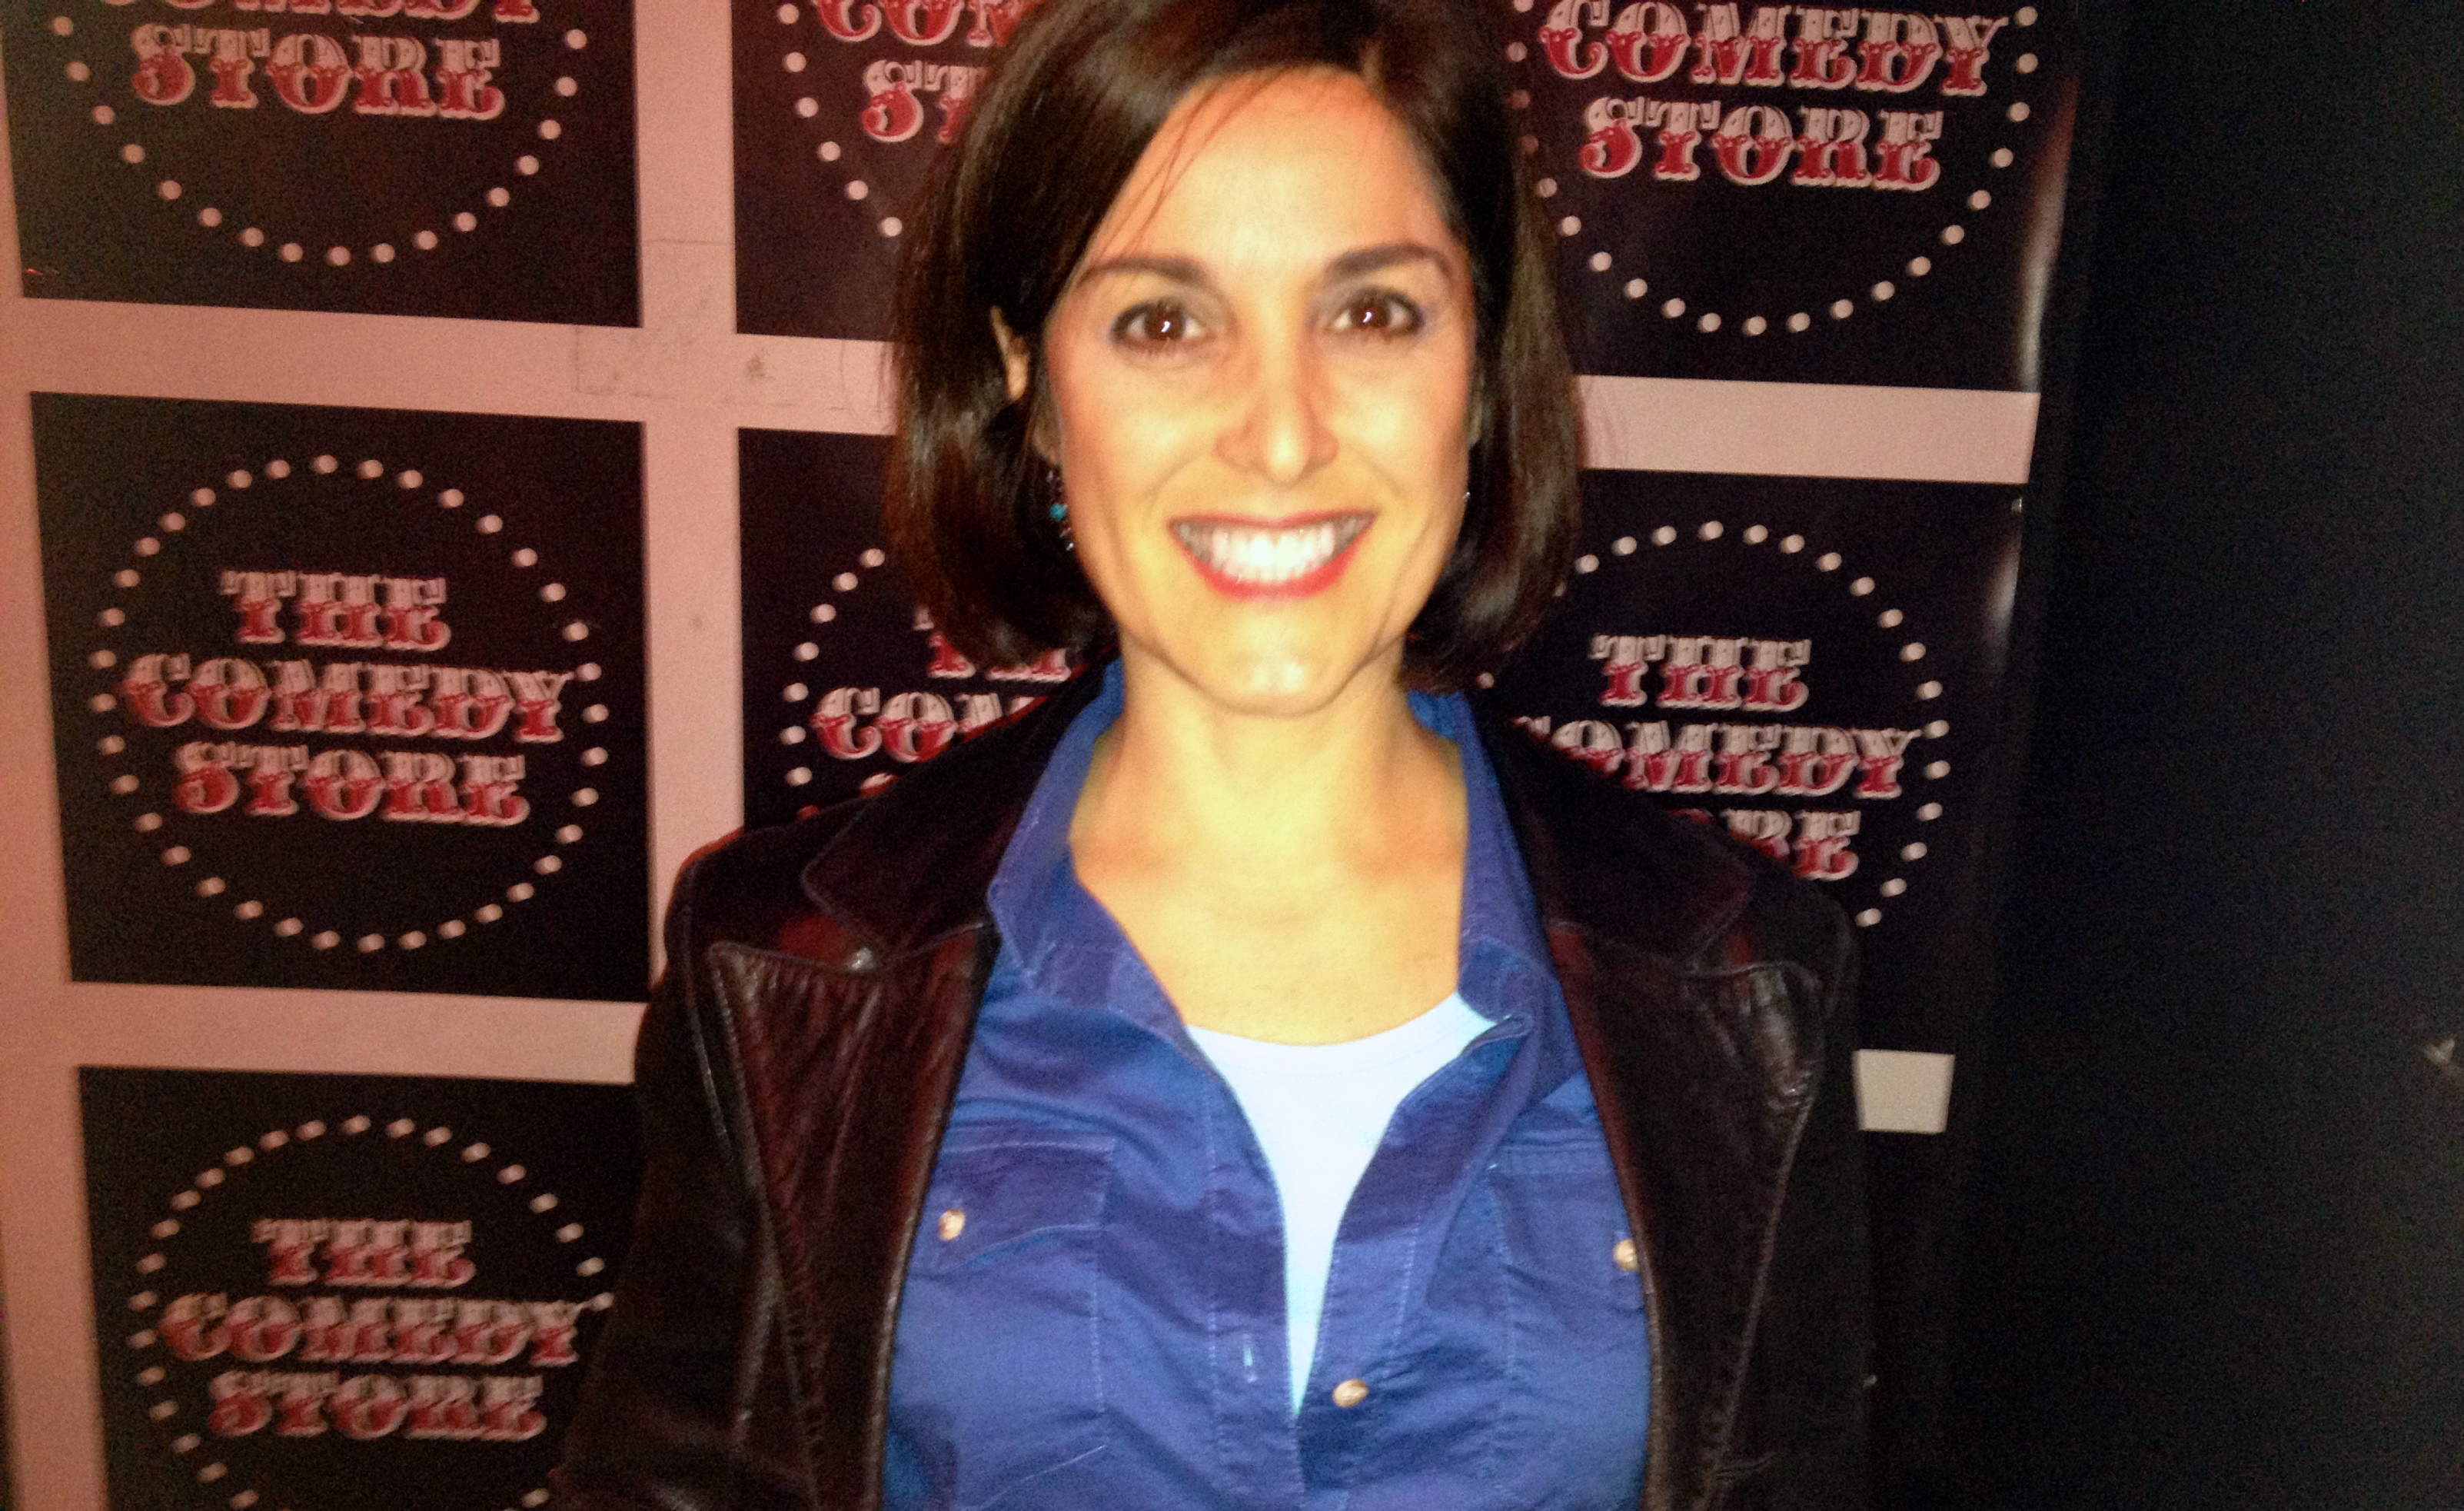 Chrissy Bergeron performs at the Comedy Store in Los Angeles